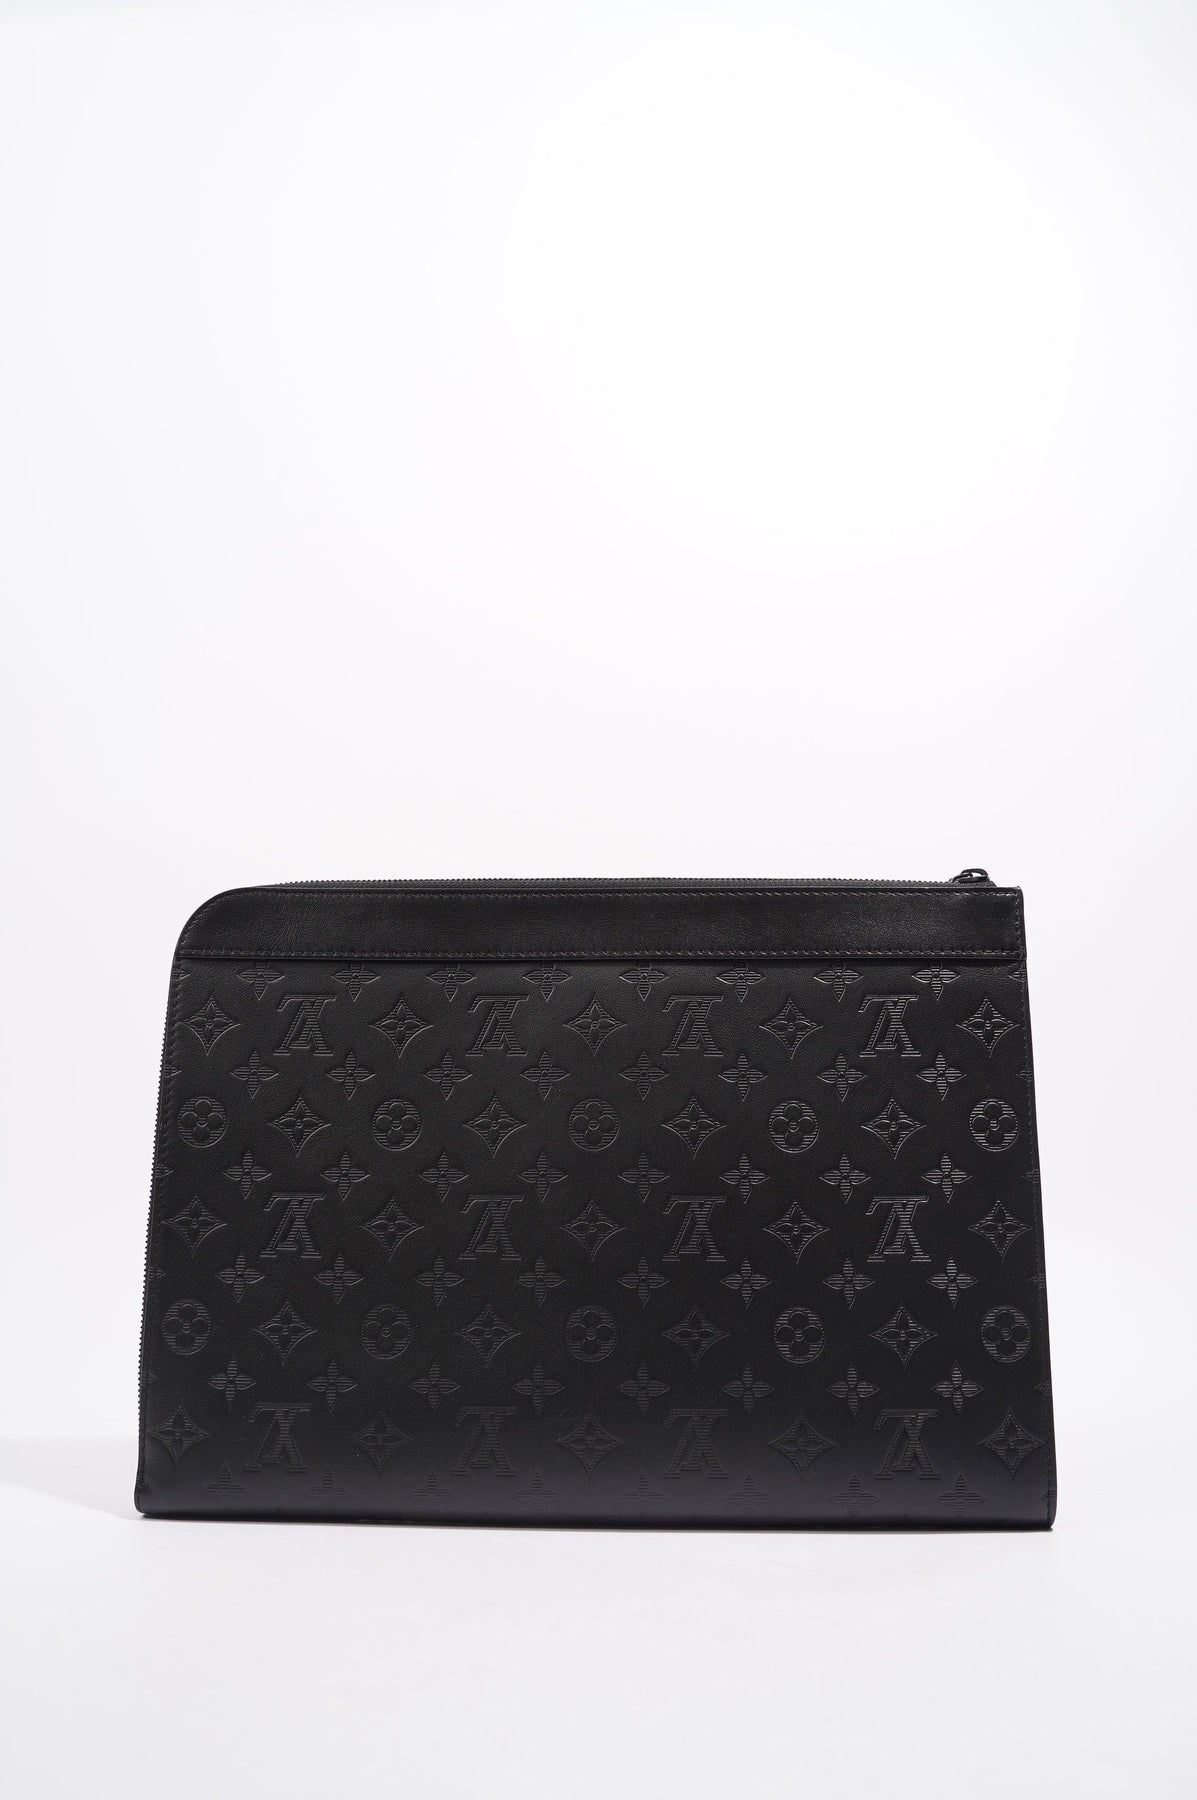 Pochette Jour Monogram Shadow Leather - Wallets and Small Leather Goods  M82080